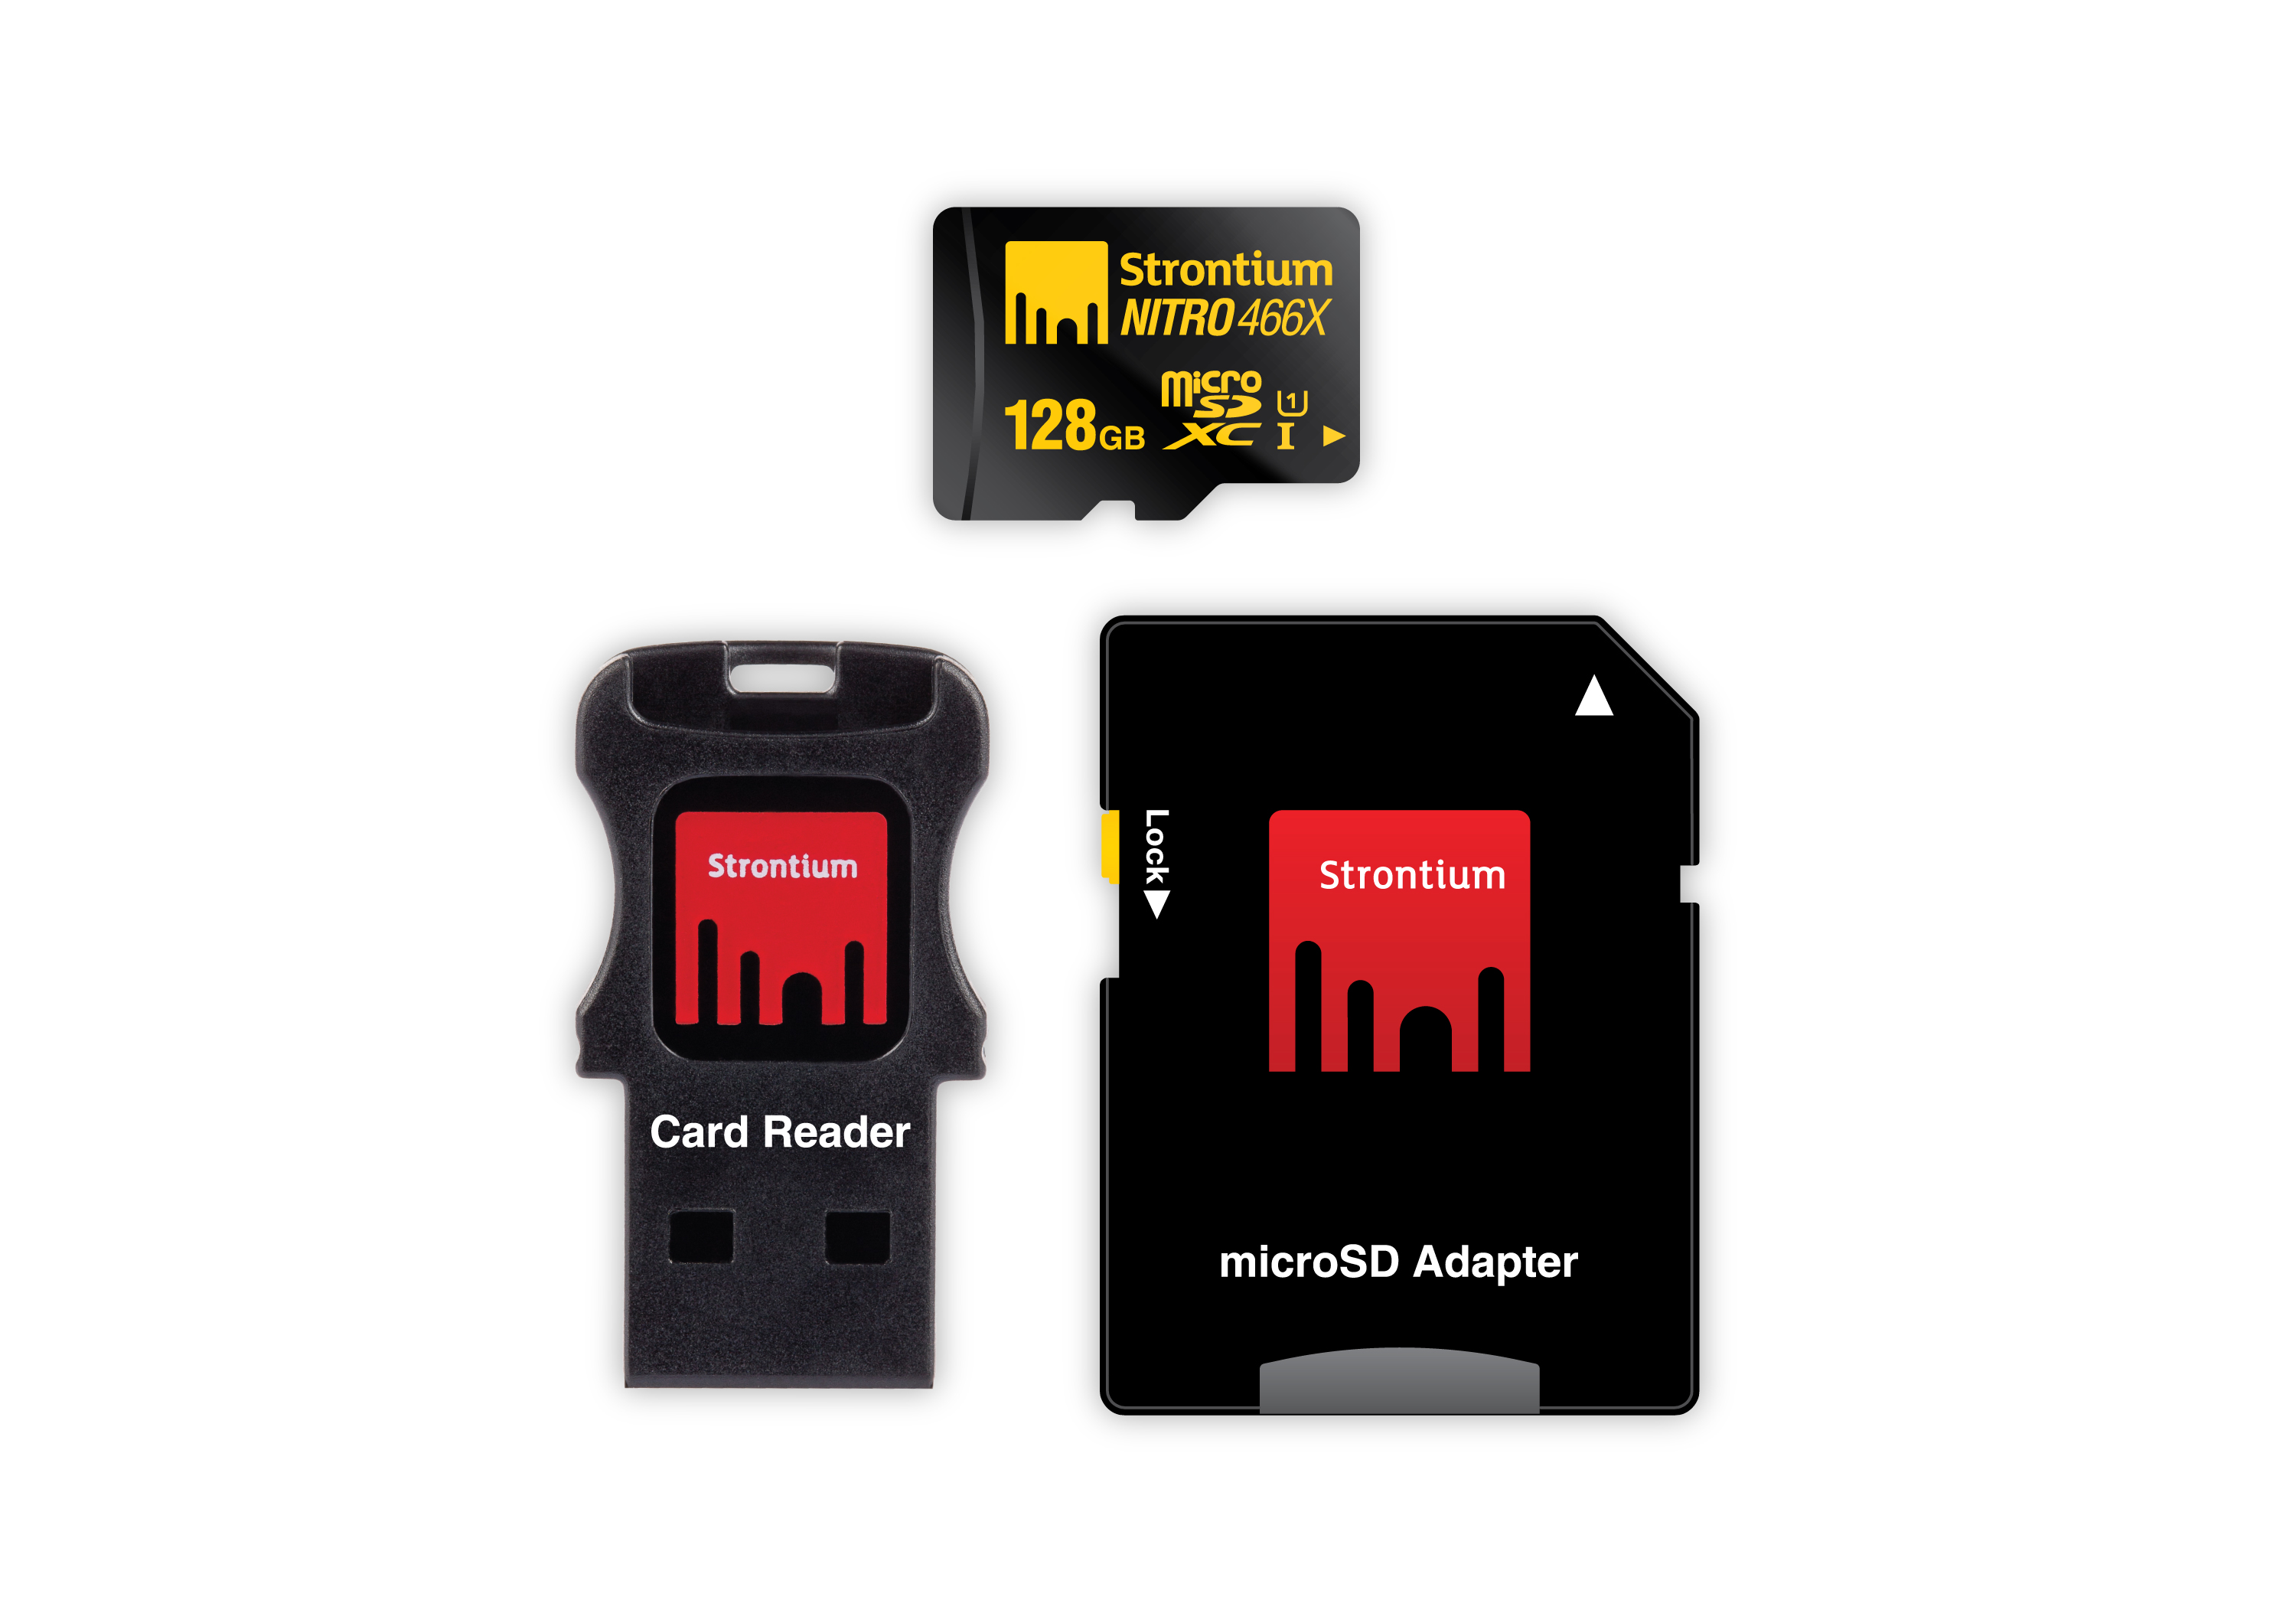 128GB-466X-NITRO-UHS-1-microSD-with-Adapter-and-Card-Reader.jpg